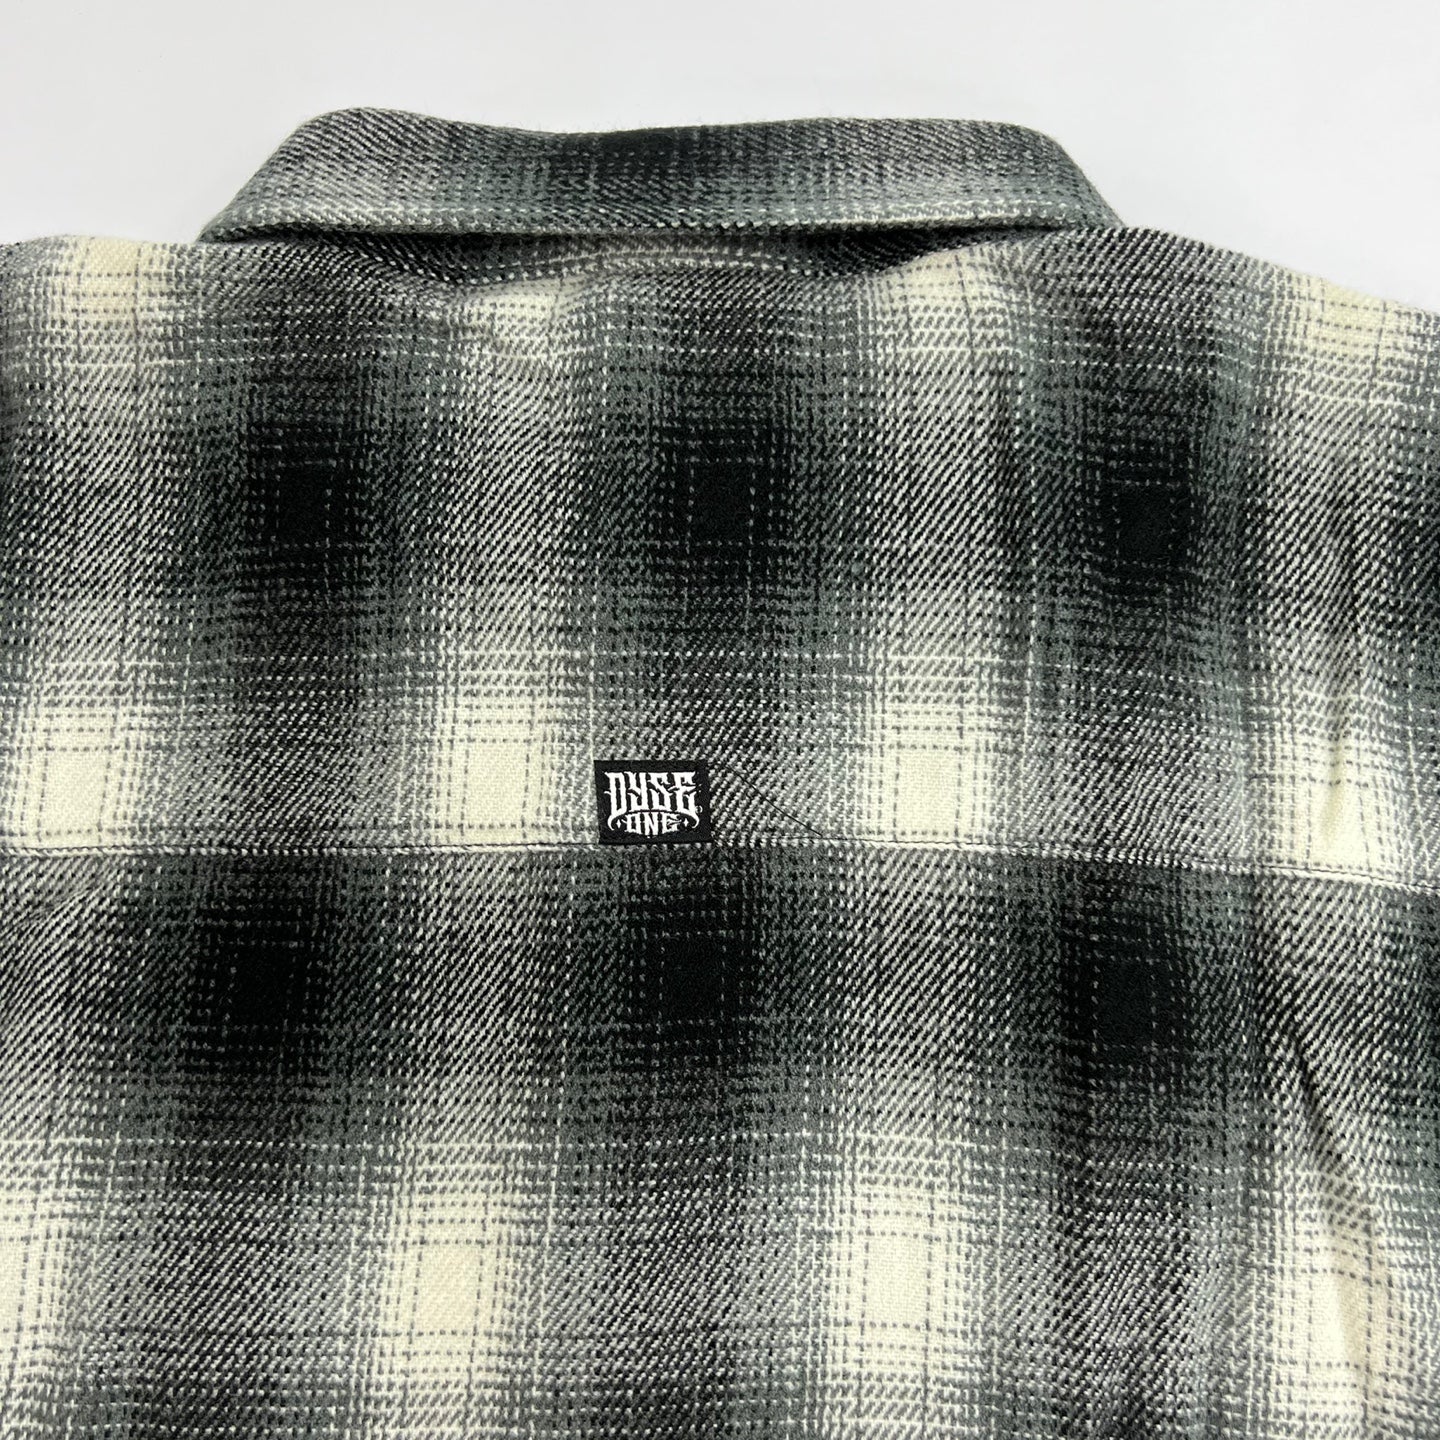 DYSEONE Heavyweight Button Down Flannel Shirts